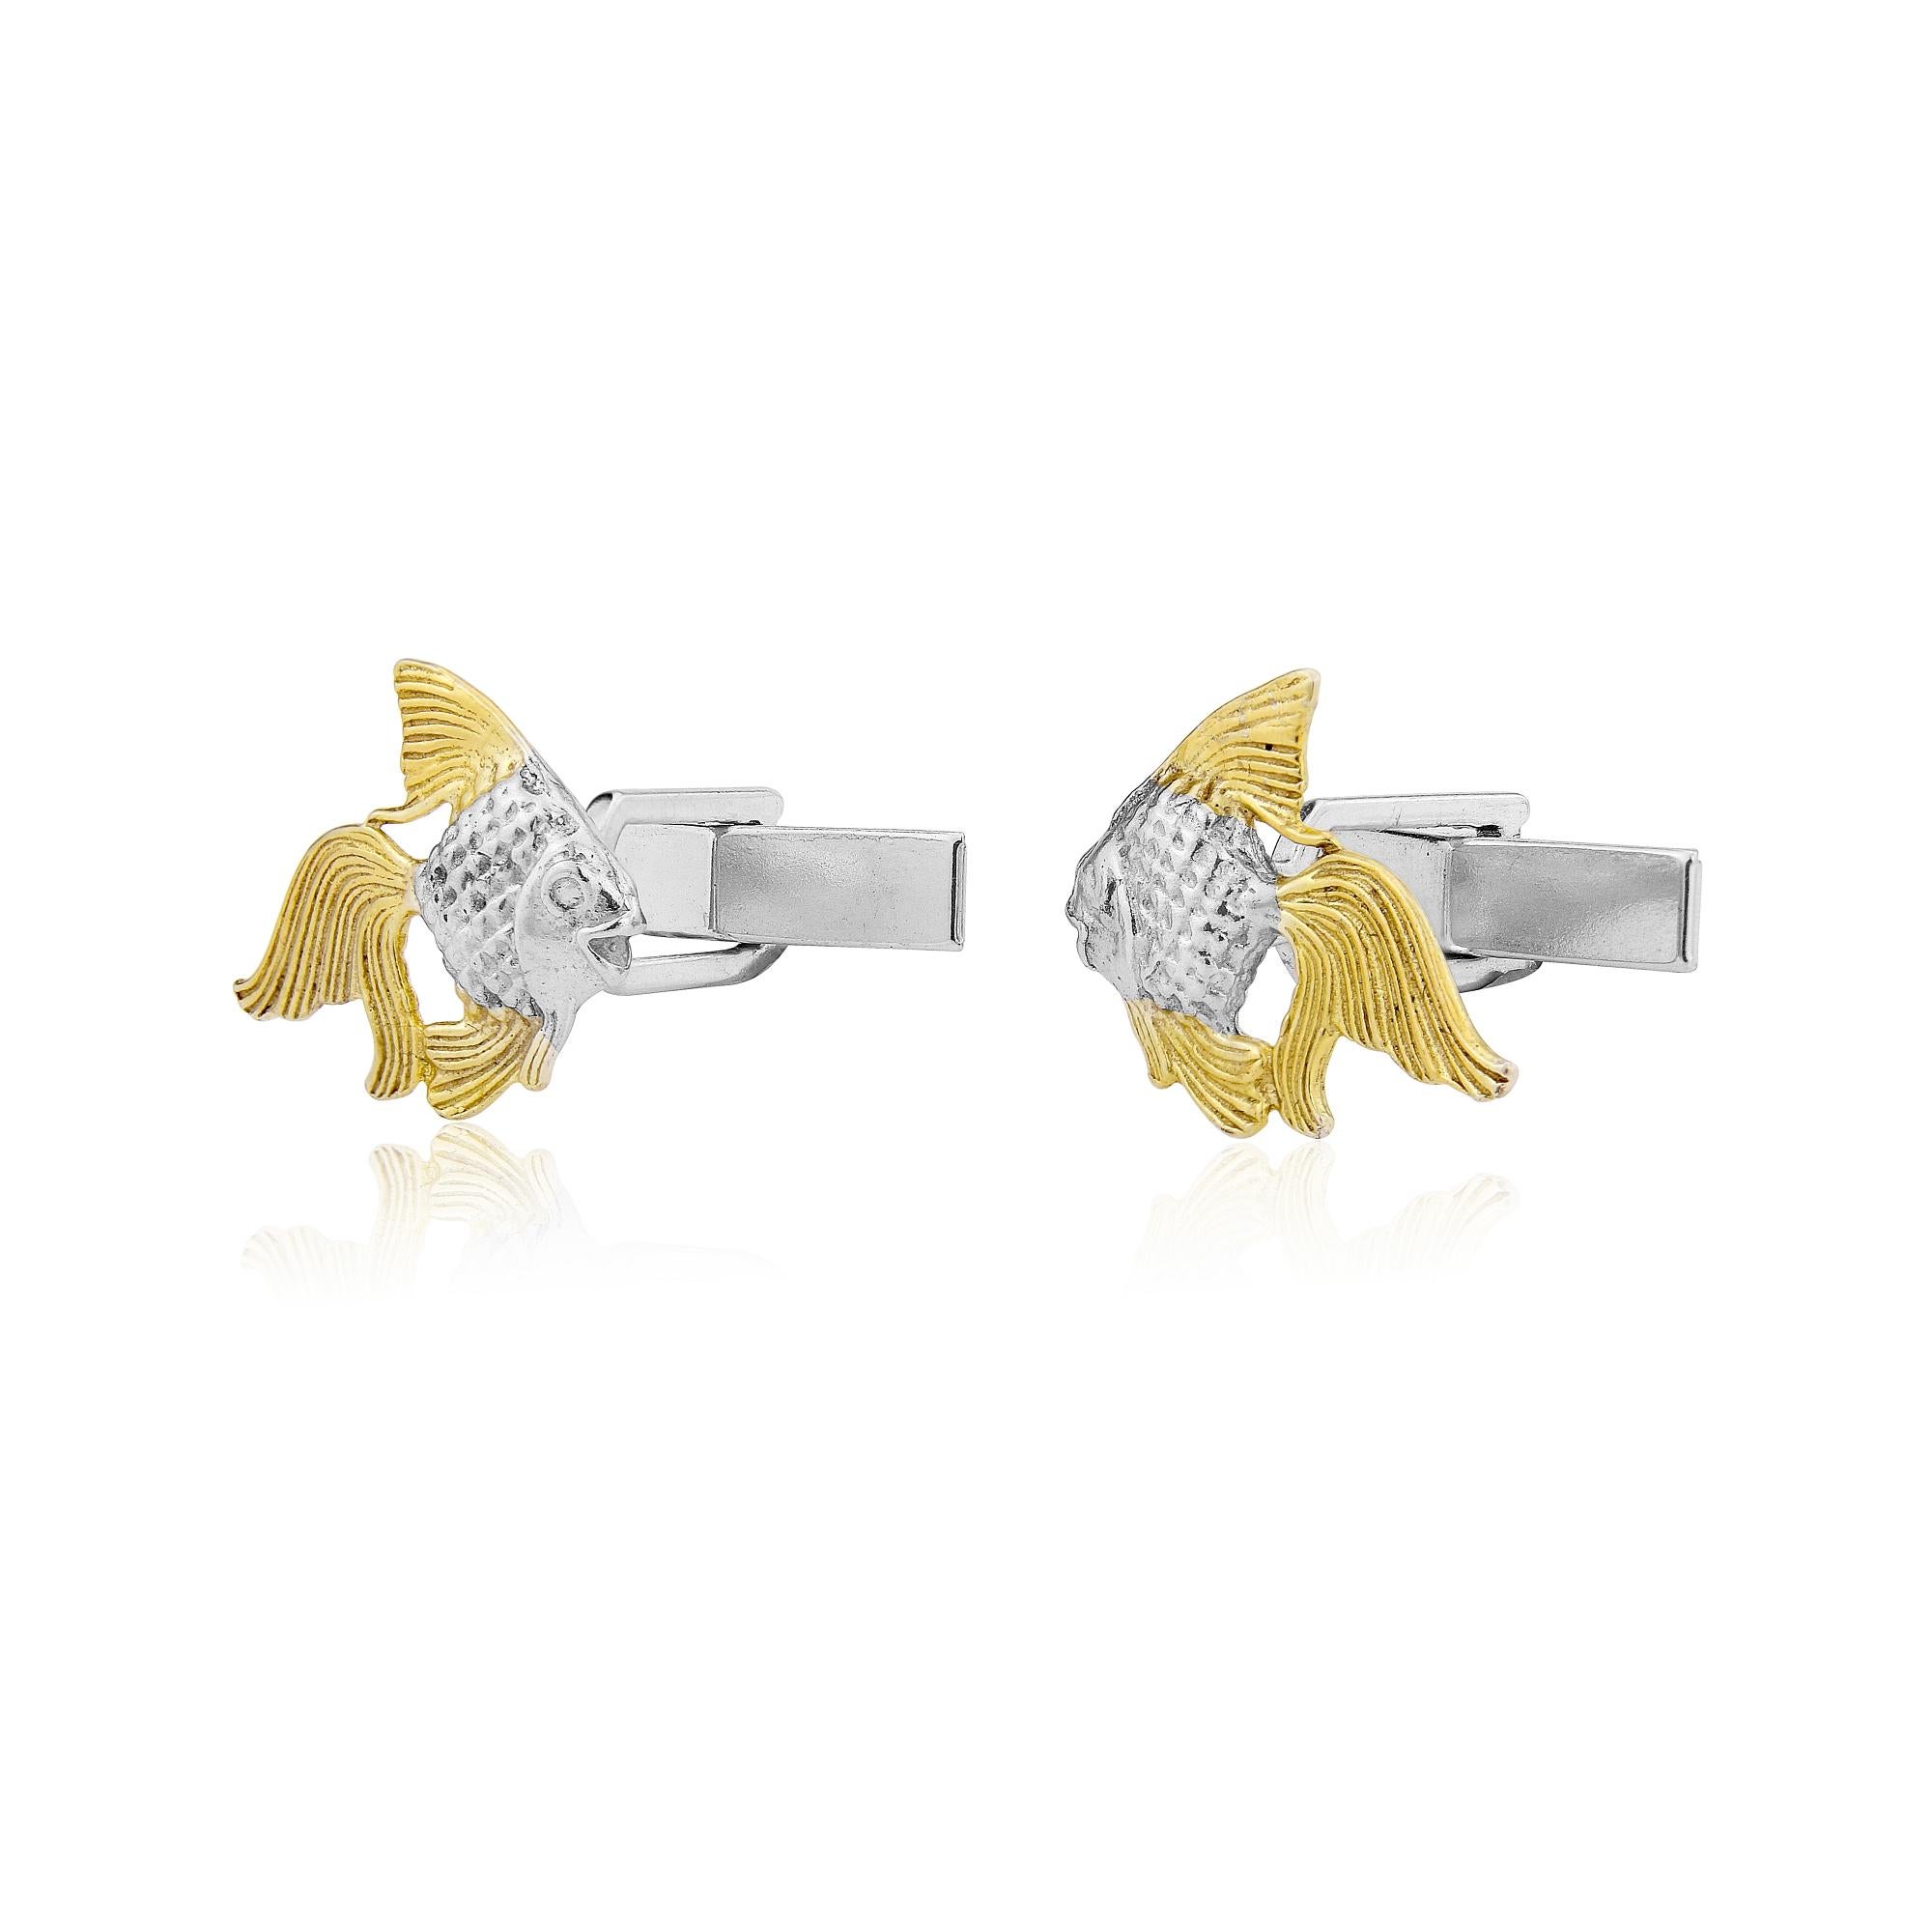 This beautiful design encapsulates Simon Kemp's speciality of using 18 K Gold to enhance the detail of one of Nature's stunning creatures.
The Angel fish has been cast in solid sterling silver capturing the intricacy of this stunning design. The